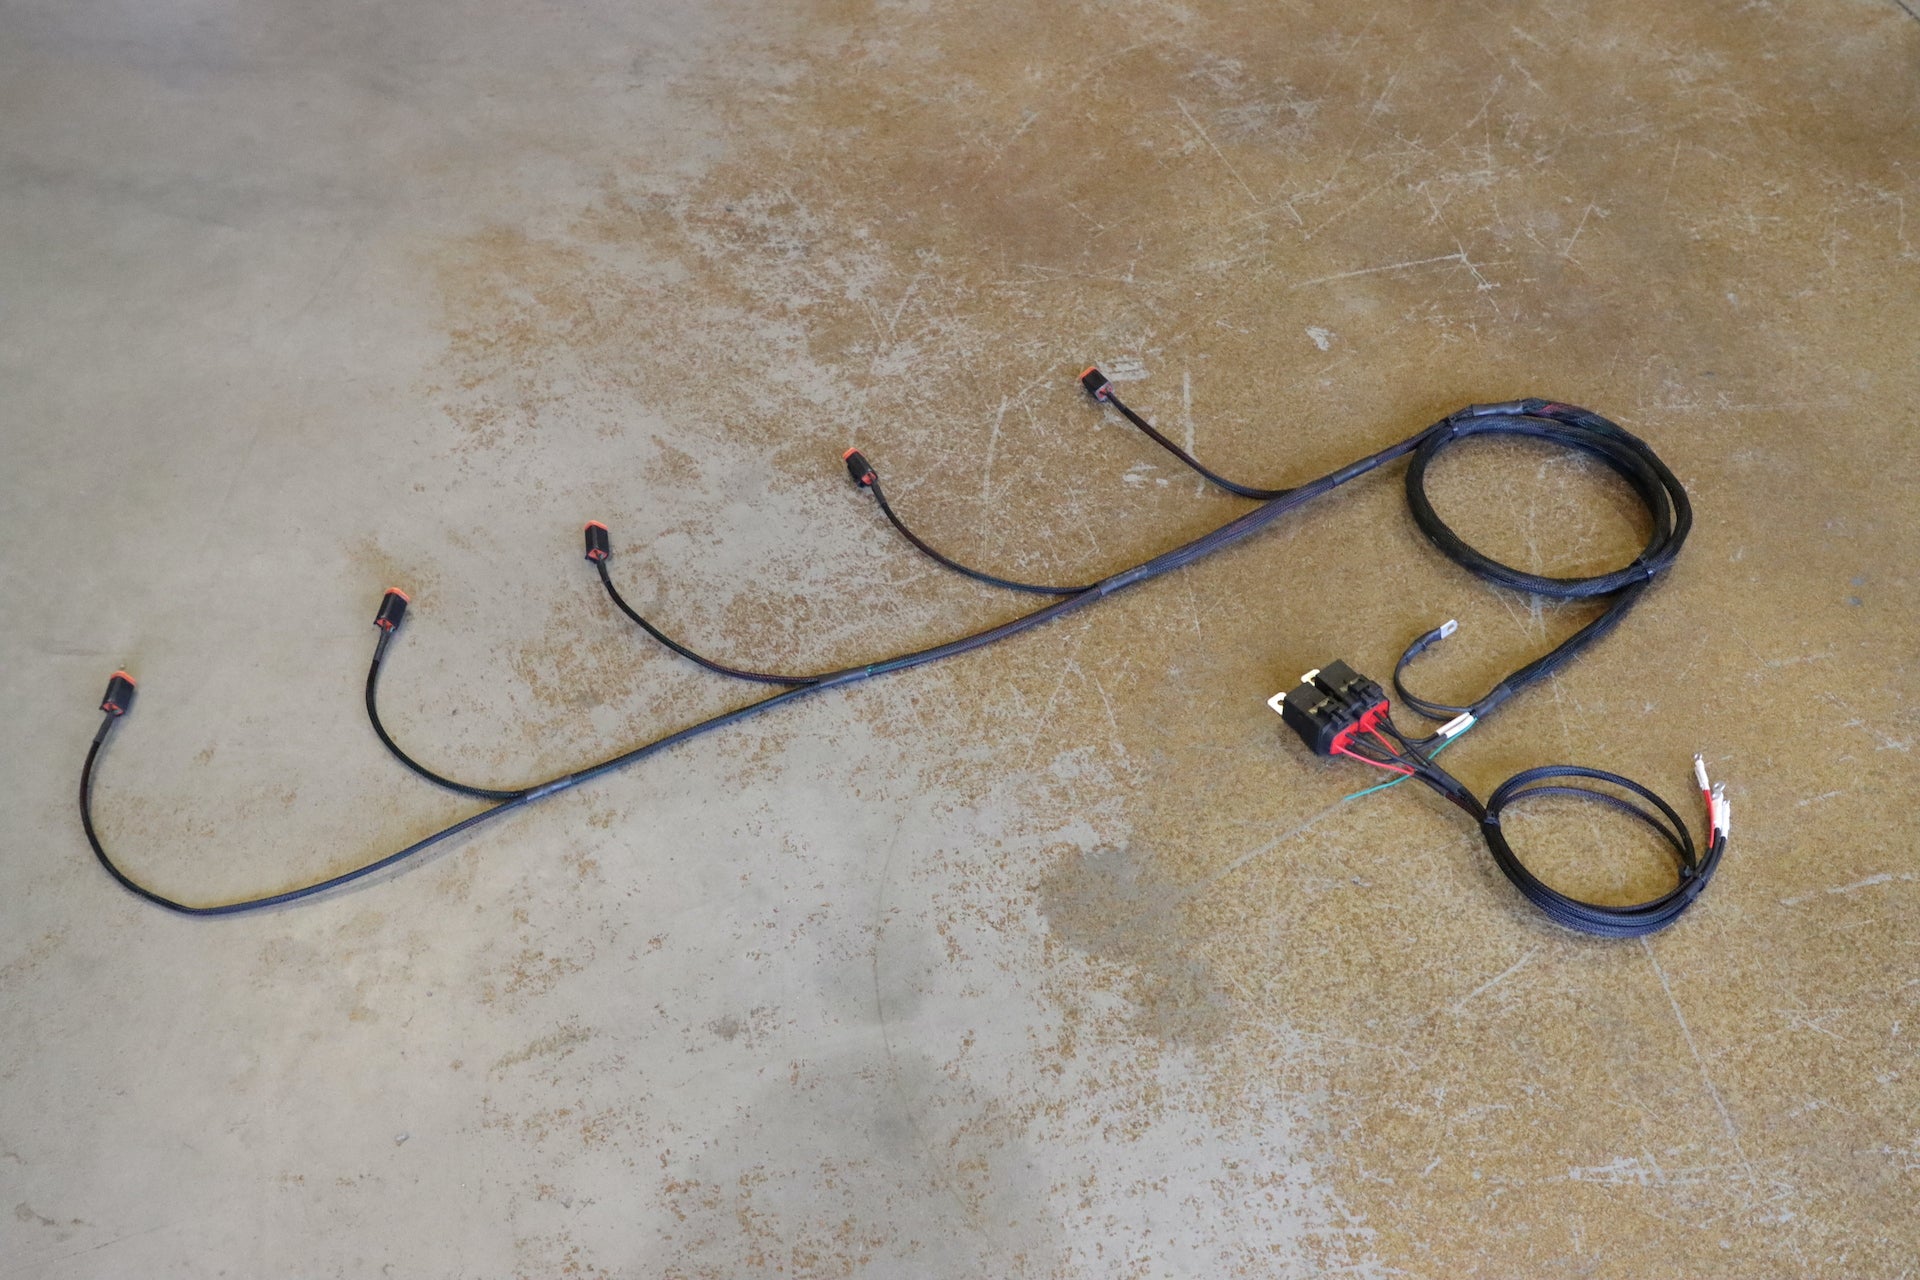 Dual zone high amp baja designs lp9 and lp6 wiring harness for HD RAM and Ford Super Duty trucks